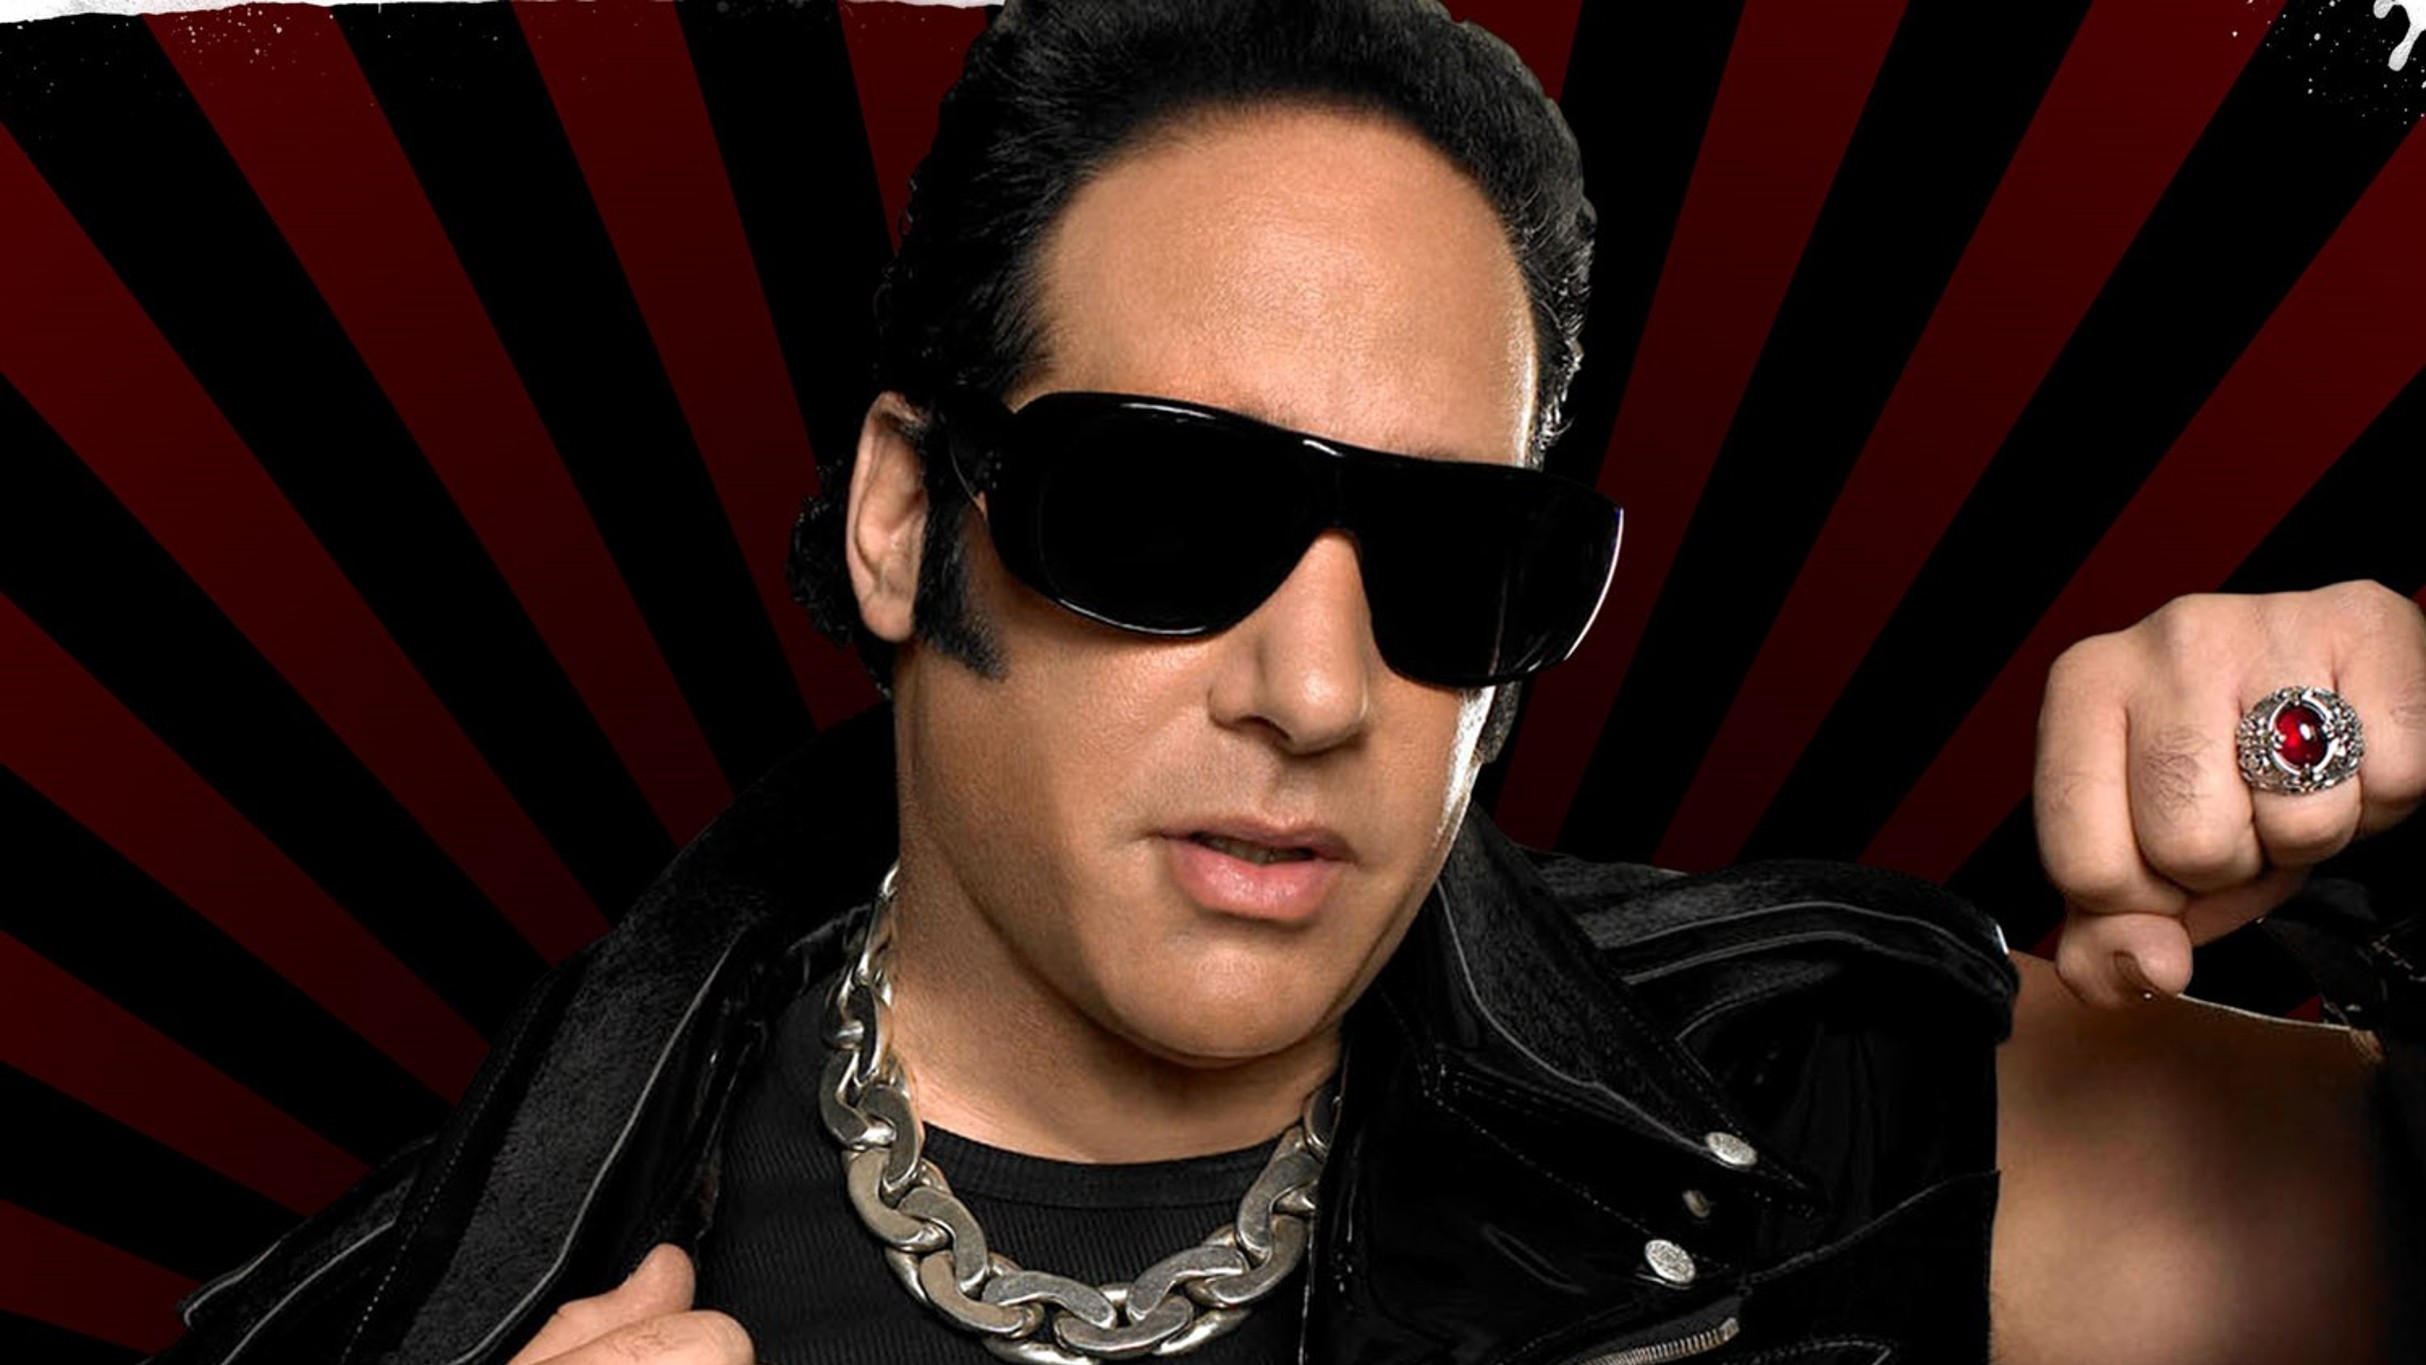 Andrew Dice Clay: Live in Concert.